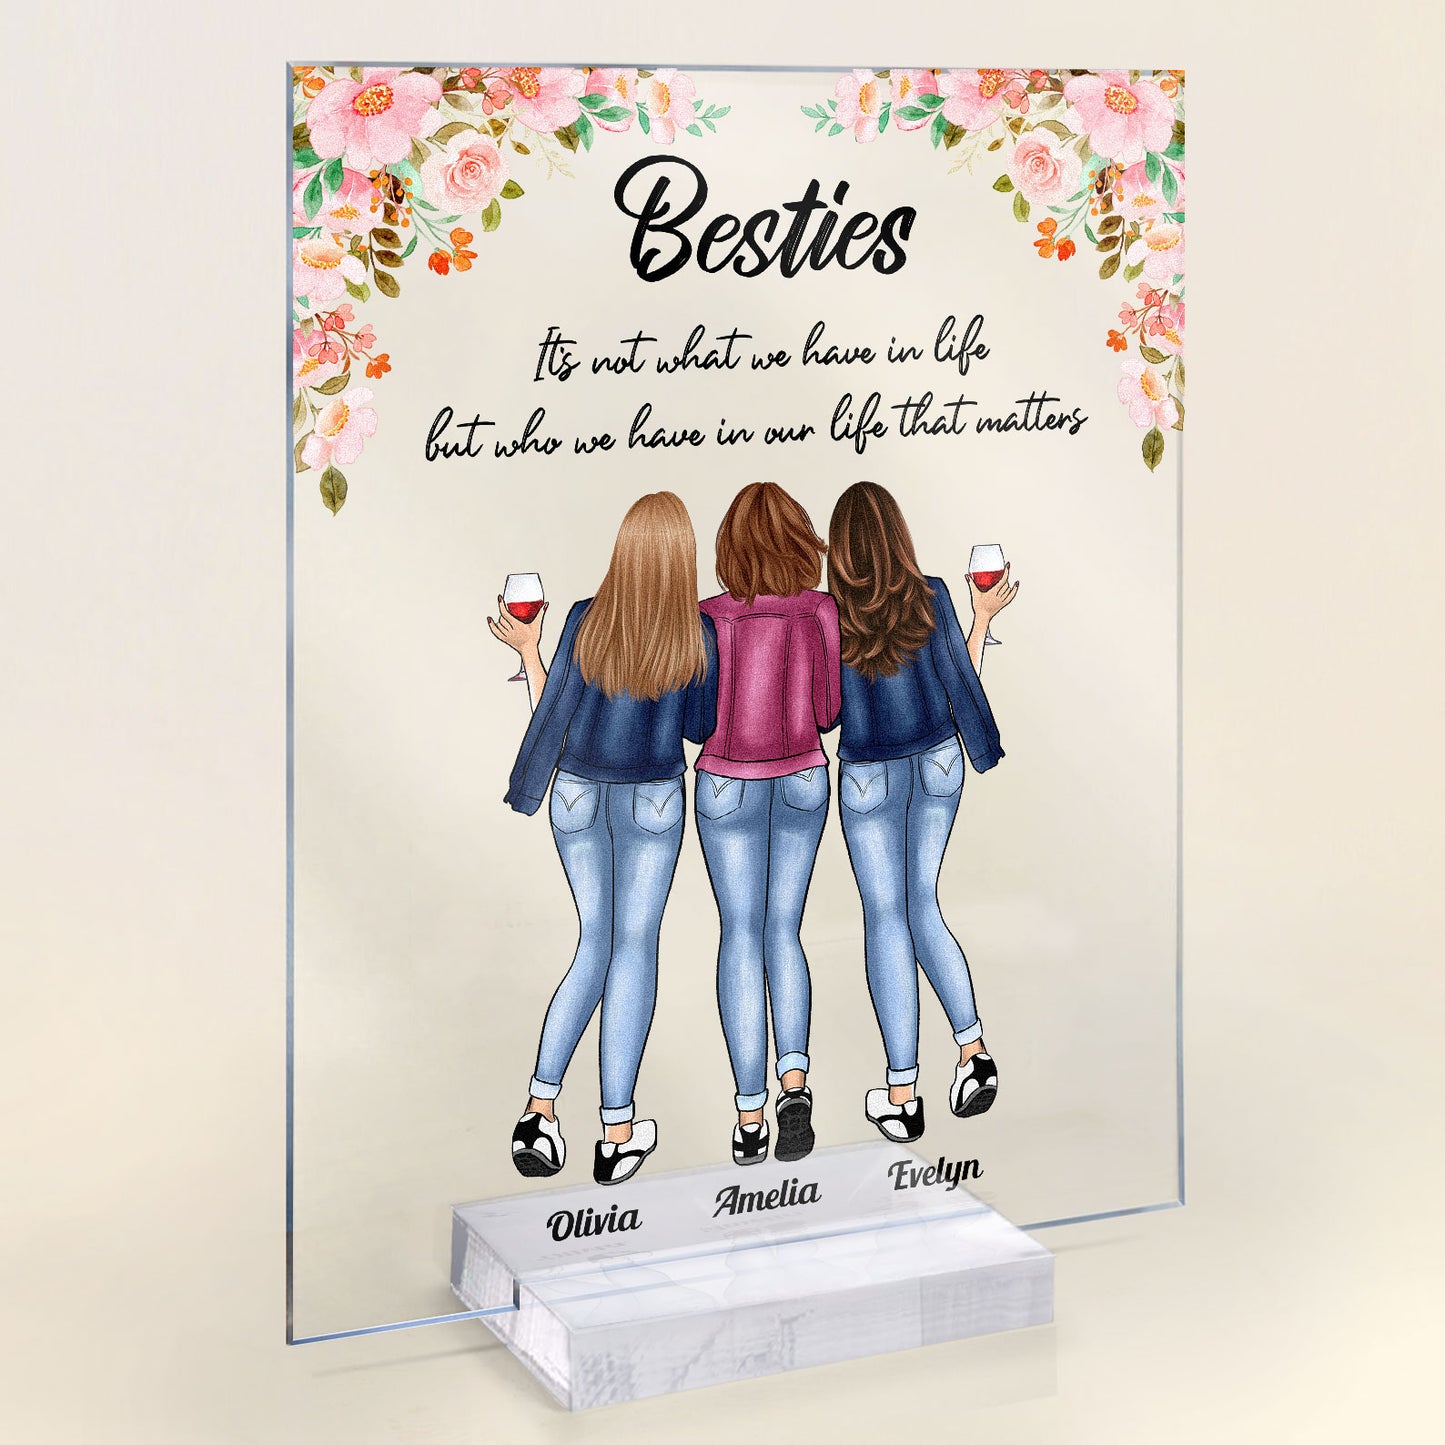 Besties It's Not What We Have In Life - Personalized Acrylic Plaque - Birthday, Friendship's Day, Friend's DayGift For Friends, Besties, BFF